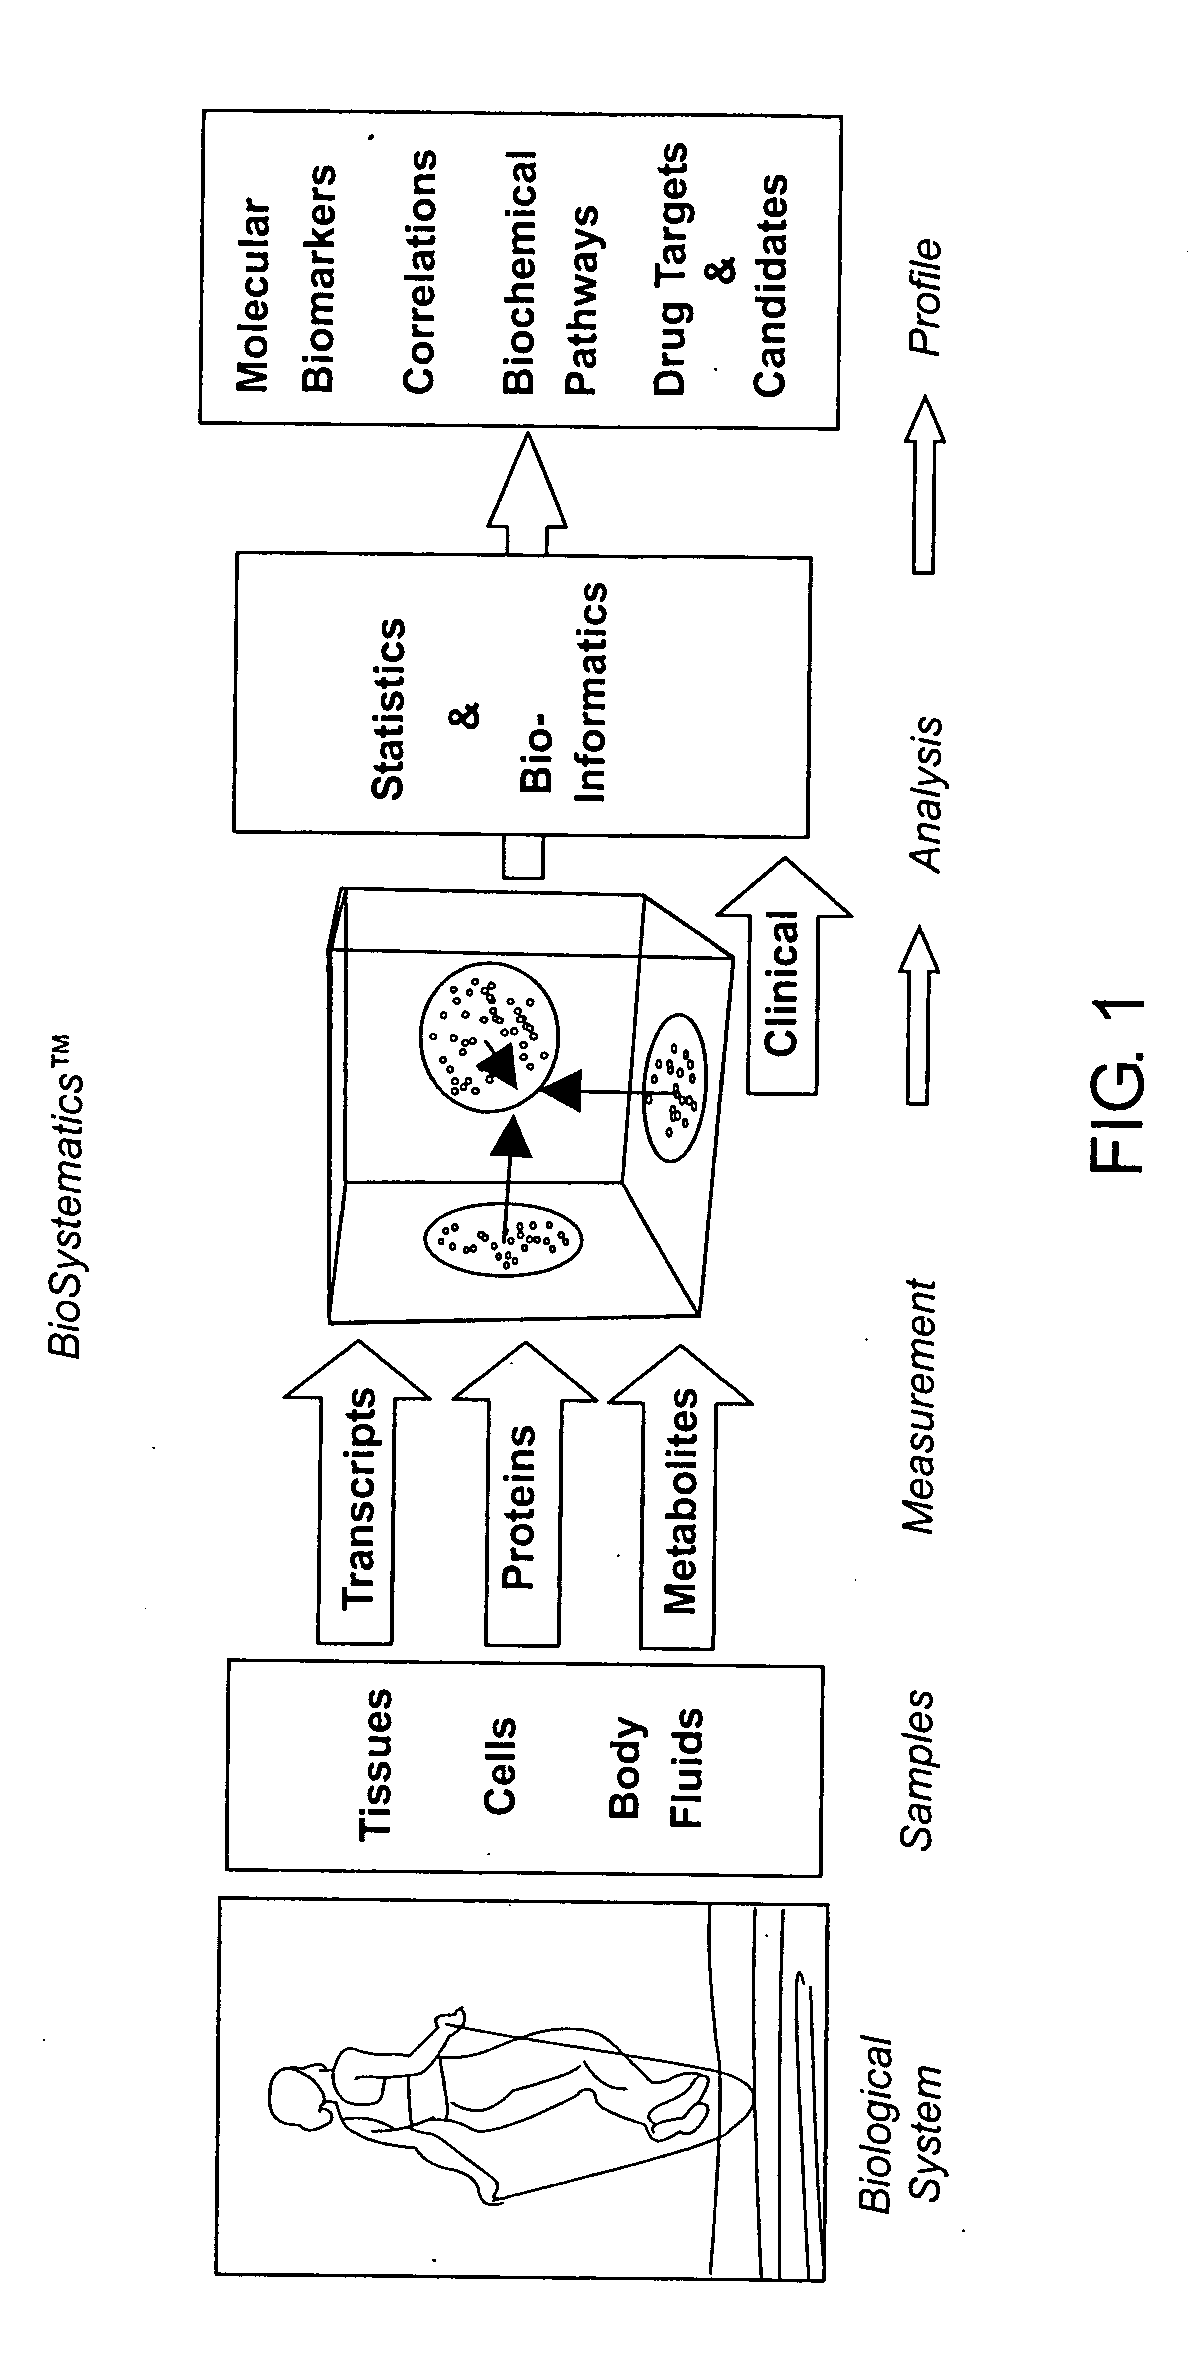 Methods and systems for profiling biological systems